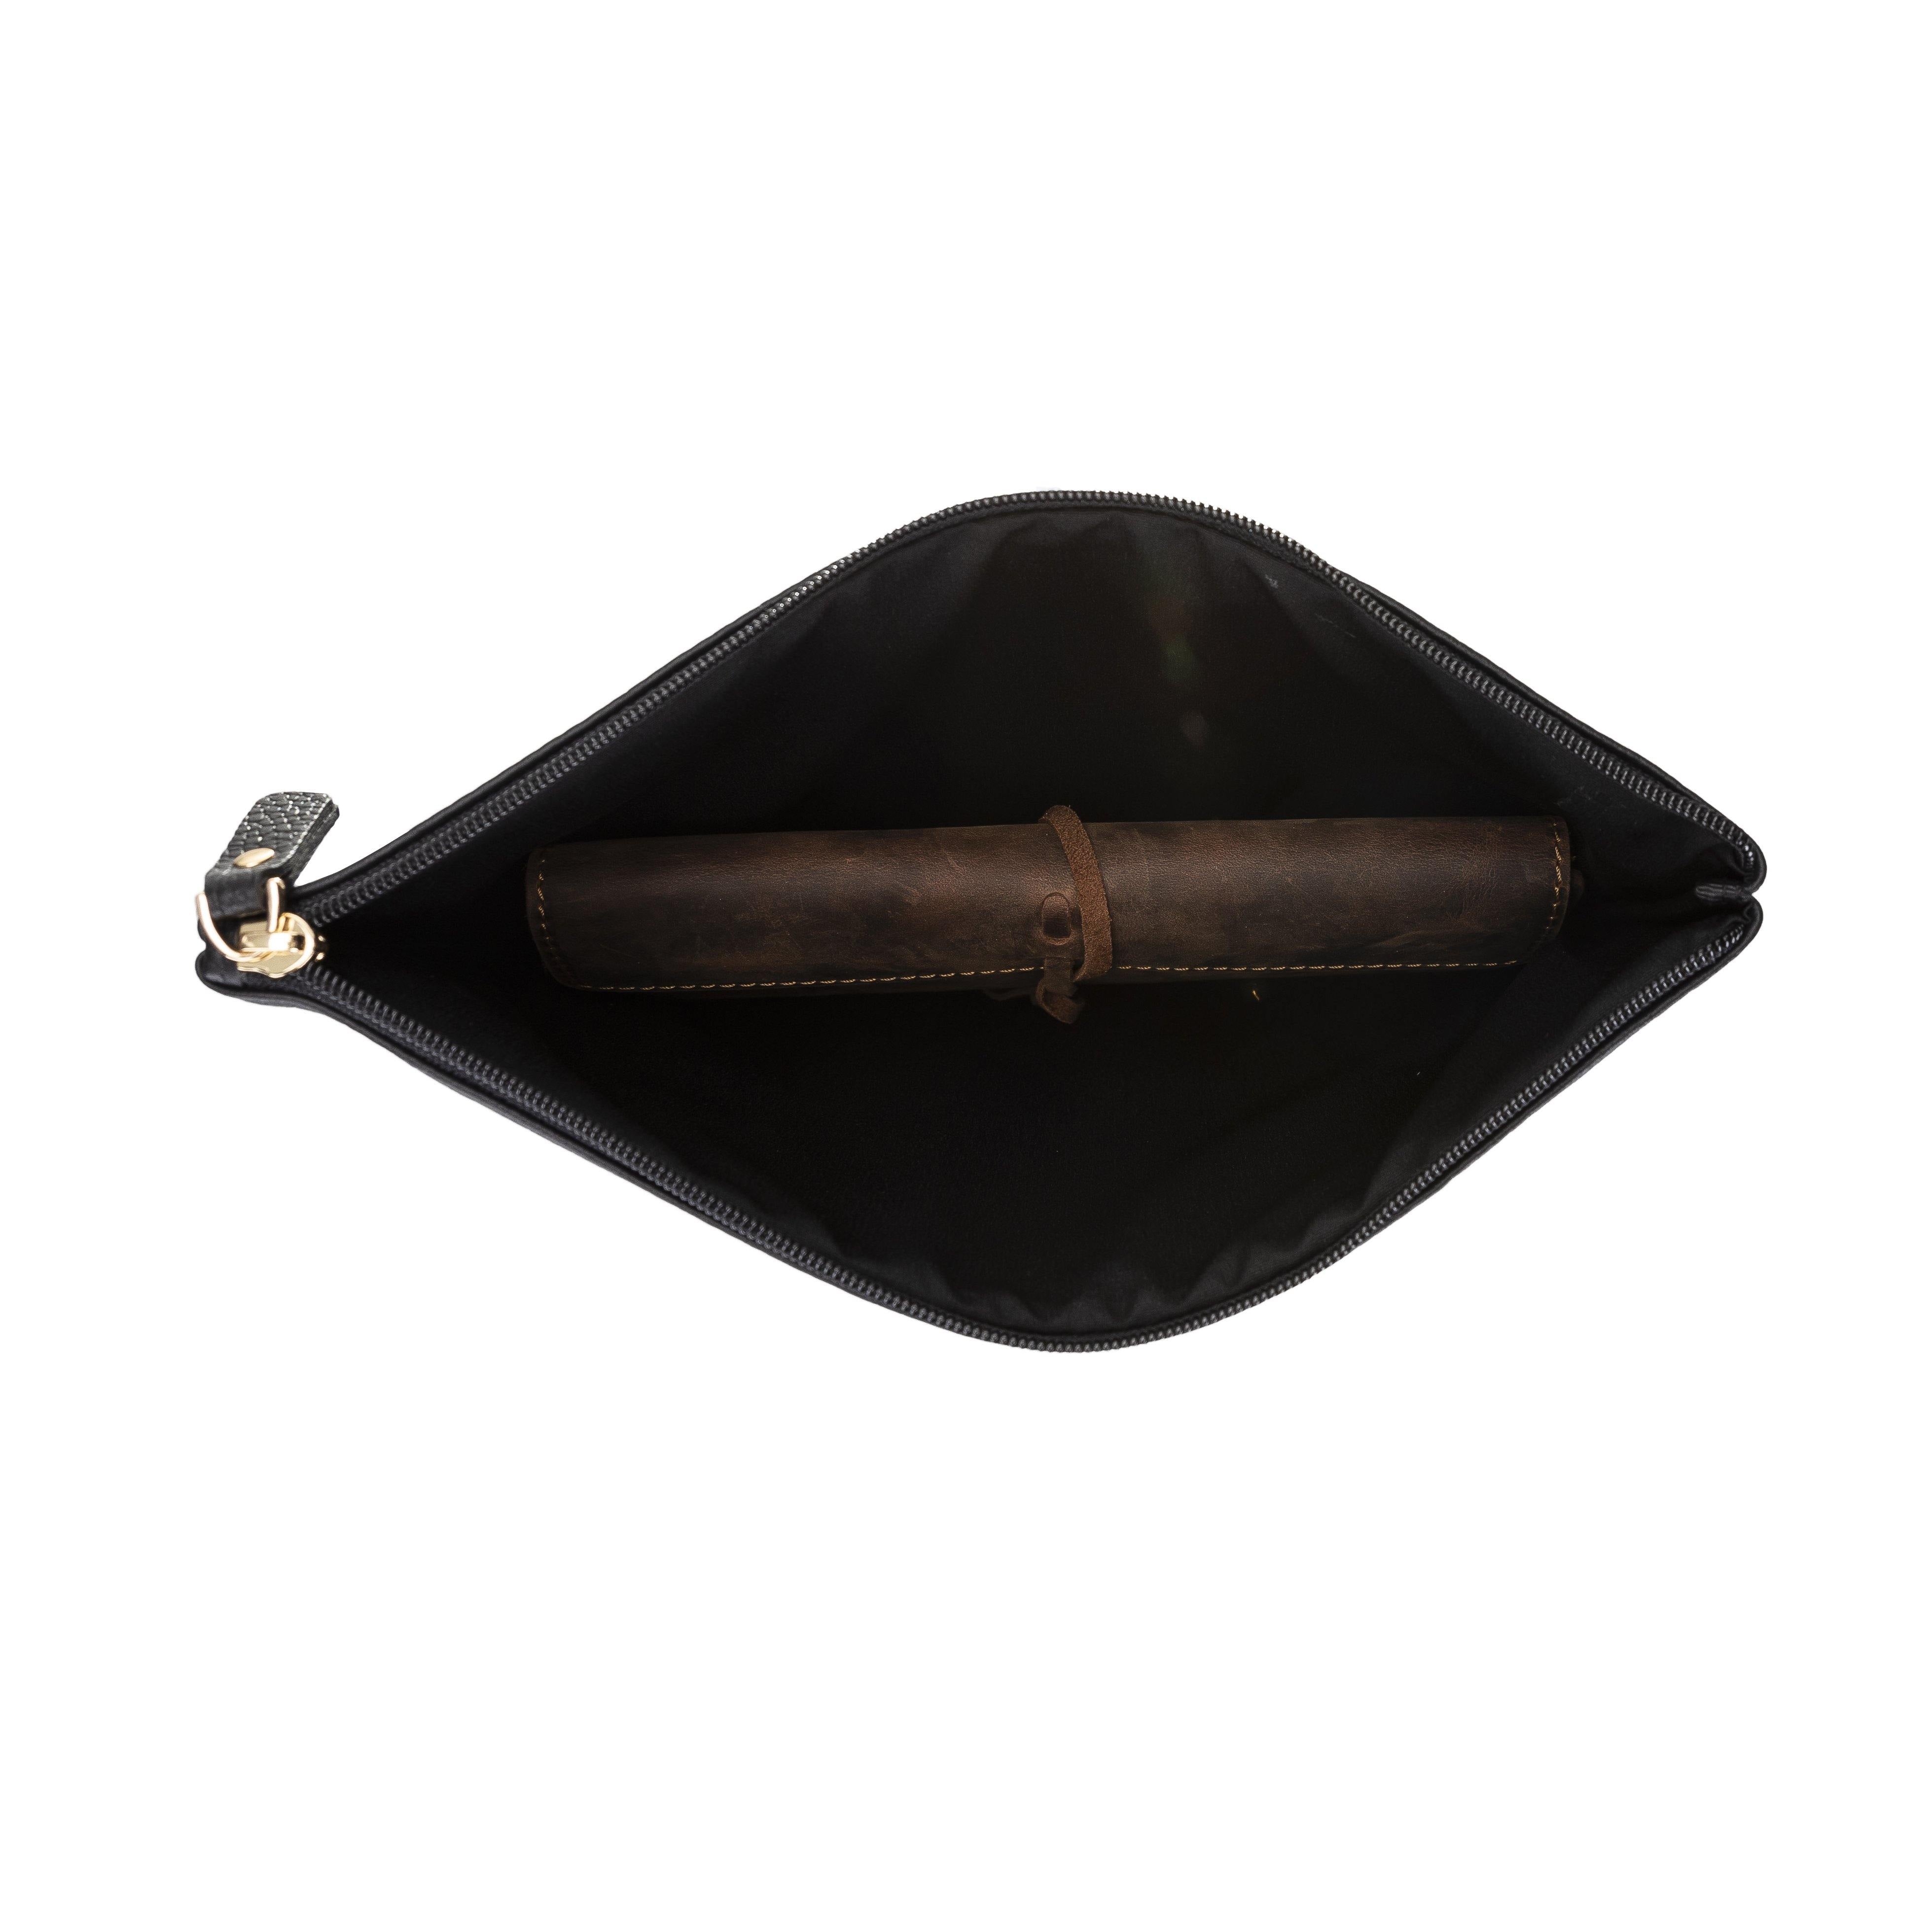 Genuine leather purse, clutch bag | personalised with your initials or name - PersonalisebyLisa